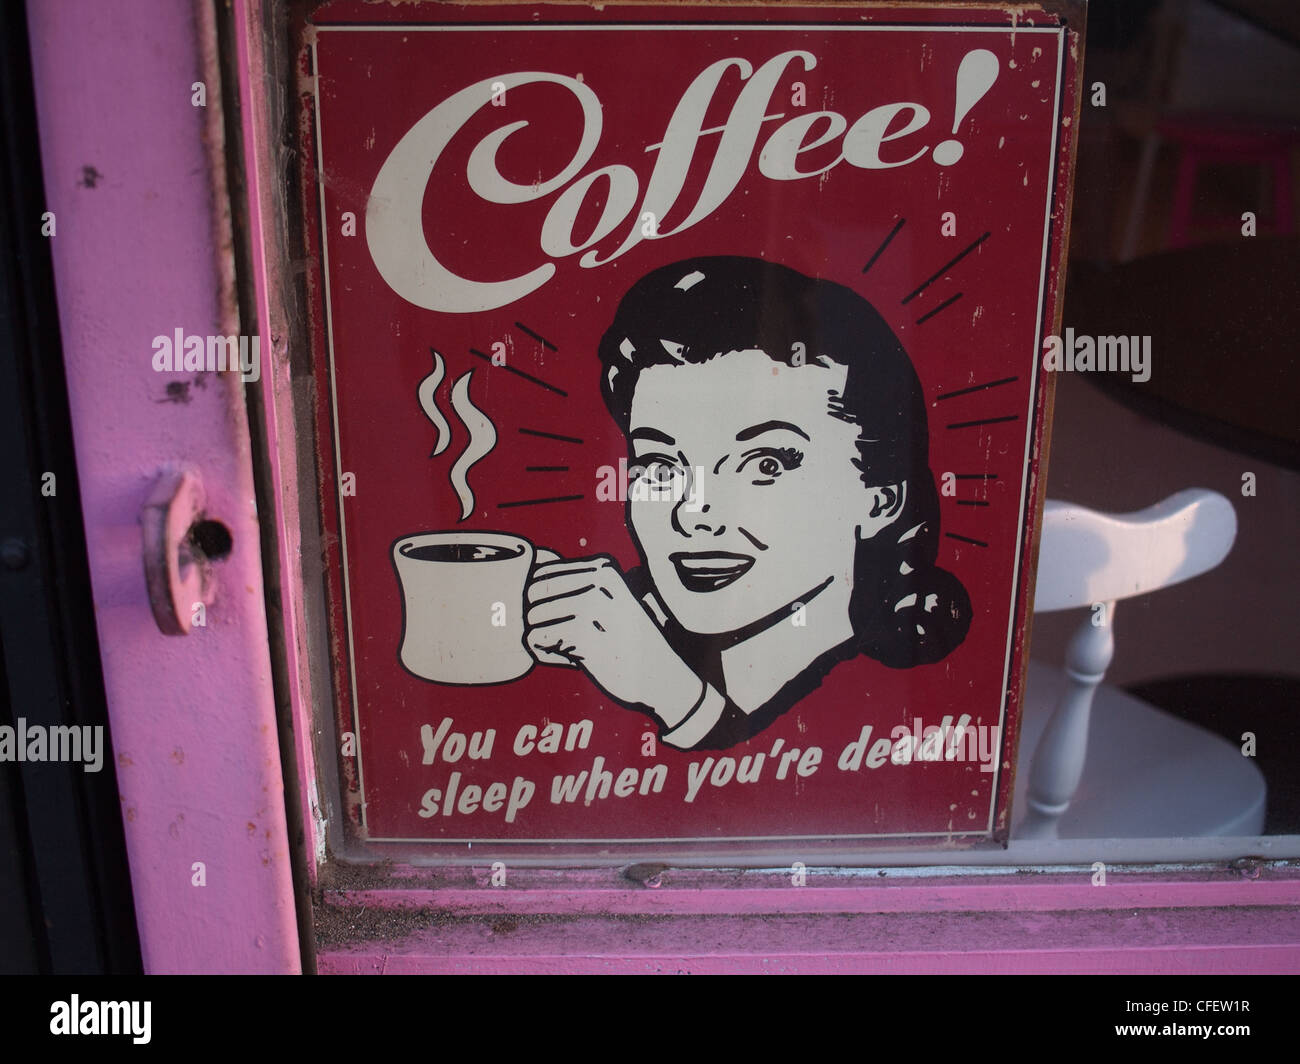 Coffee poster in bake shop, Brooklyn, New York Stock Photo